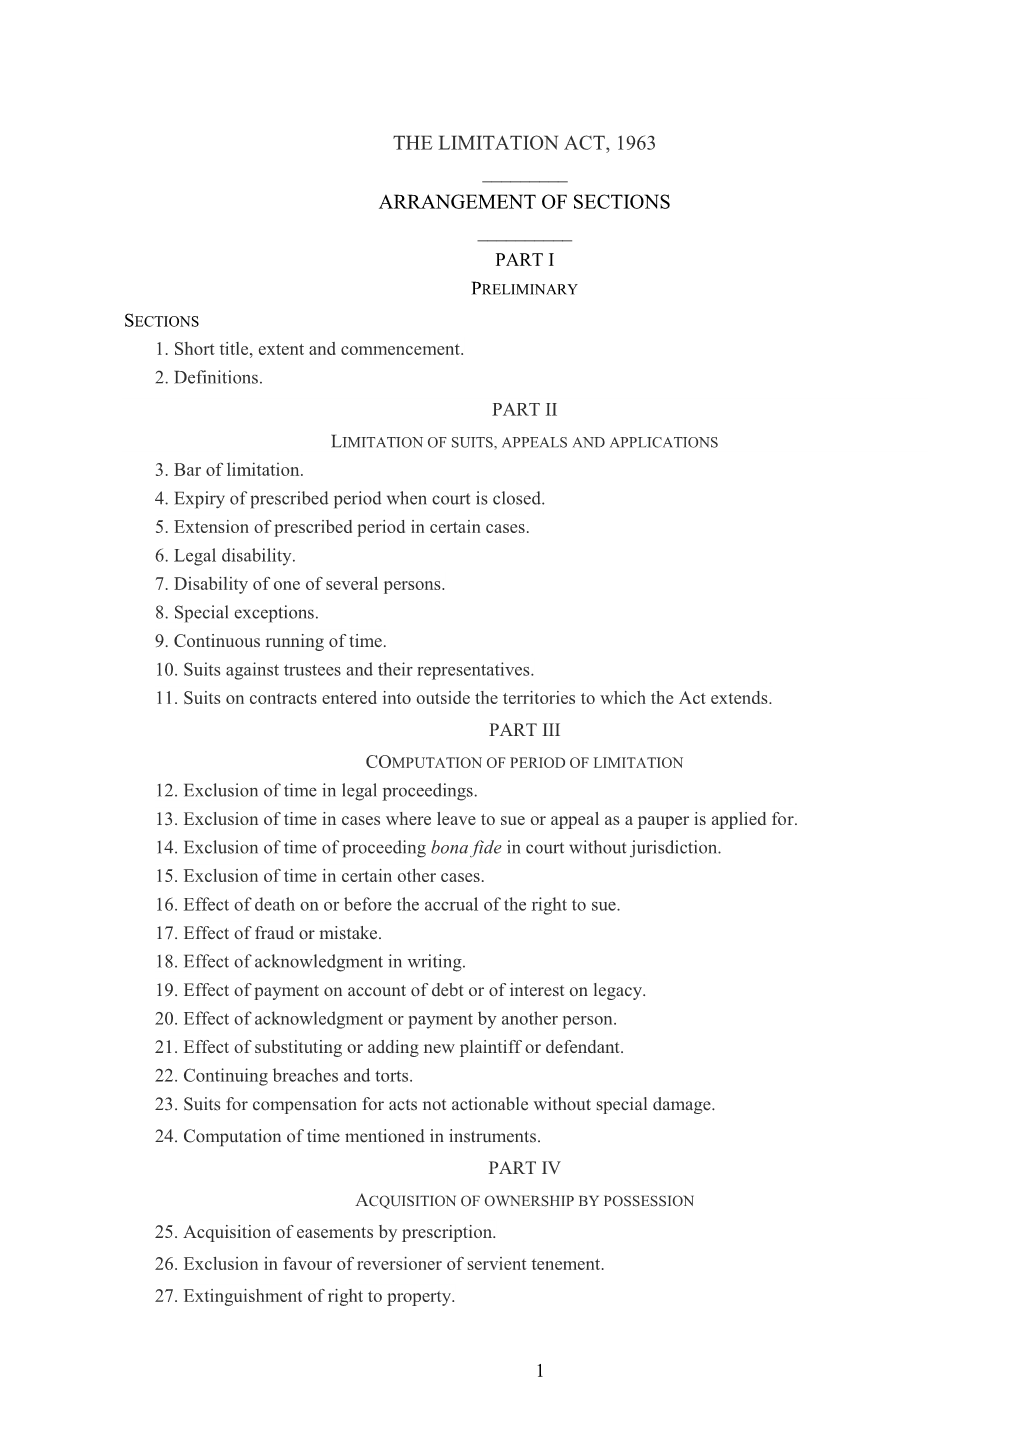 The Limitation Act, 1963 Arrangement of Sections